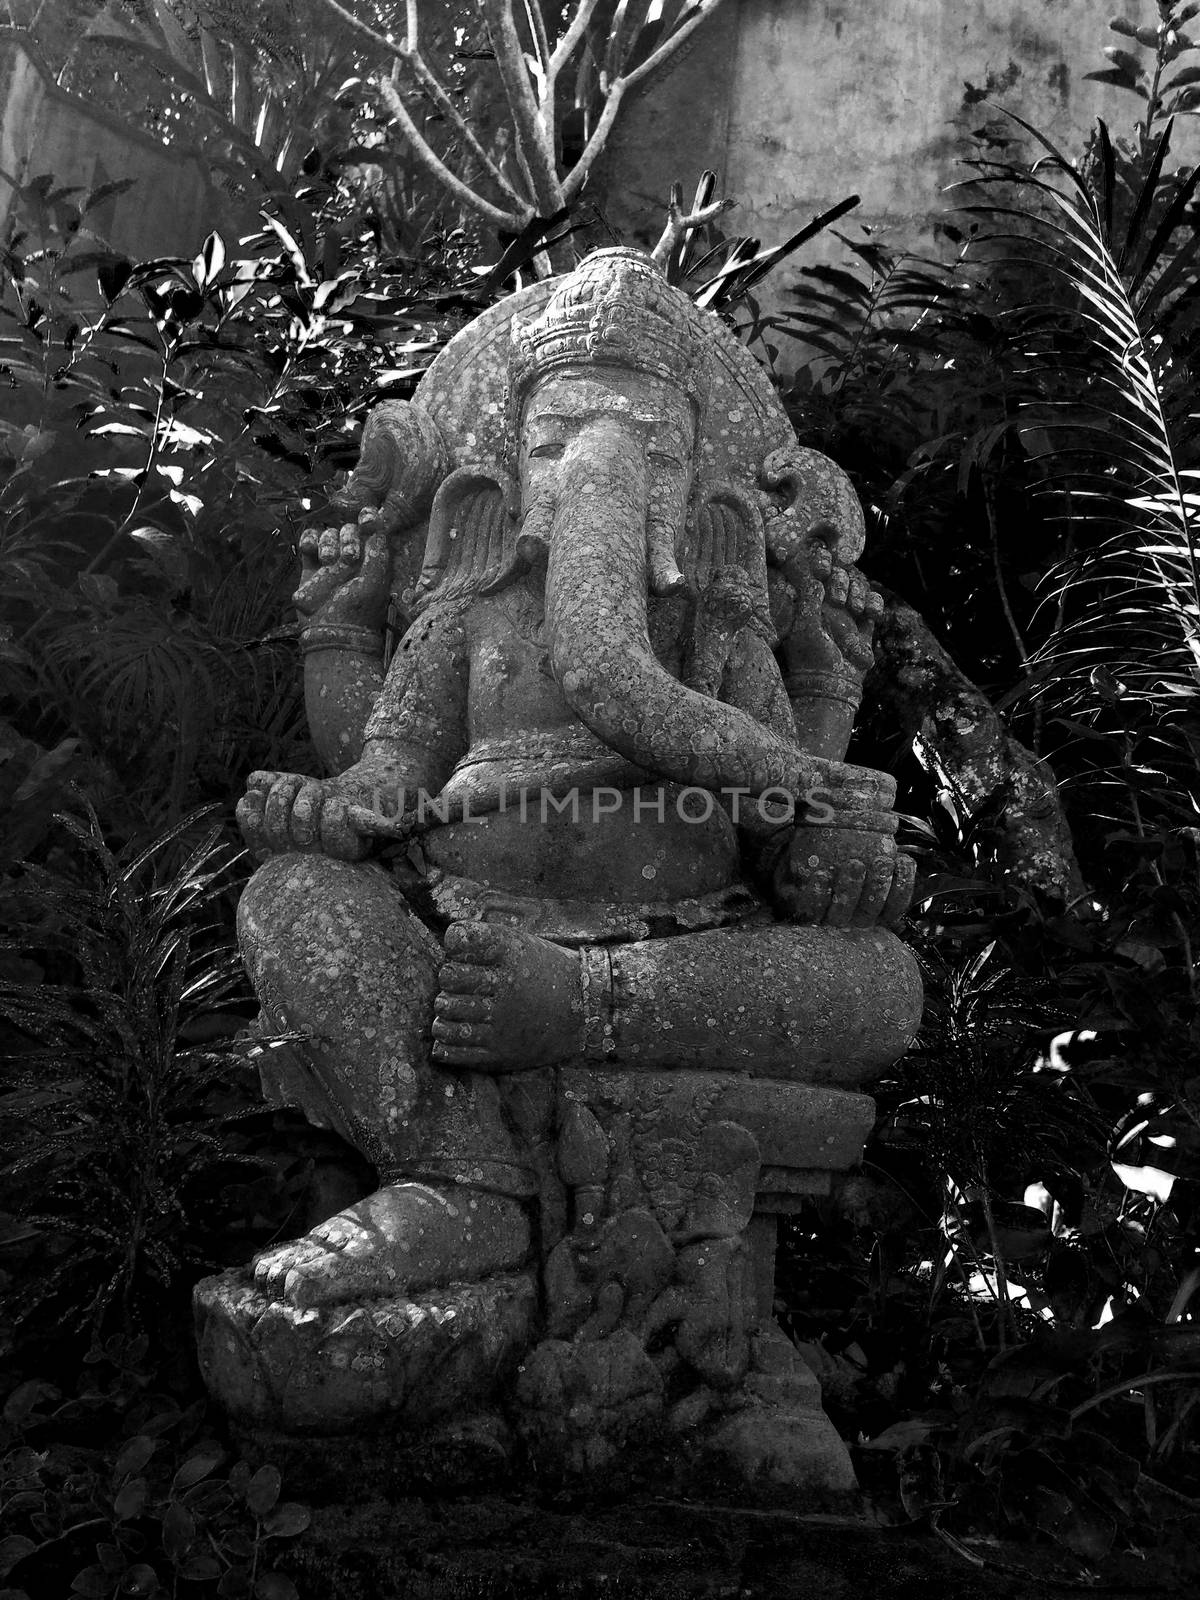 This is a statue of the hindu god Ganesh. He is the Lord of Good Fortune who provides prosperity, fortune and success.  He is the Lord of Beginnings and the Remover of Obstacles of both material and spiritual kinds.
He was beheaded by Shiva for not being aloud to pass through the door leading to Parvati's bathroom, later his creator Parvati attached a new head on the body, which was a elephants head.

because he was known as Parvati's doorkeeper, which is why he's often faced to doorways, to keep out the unworthy.